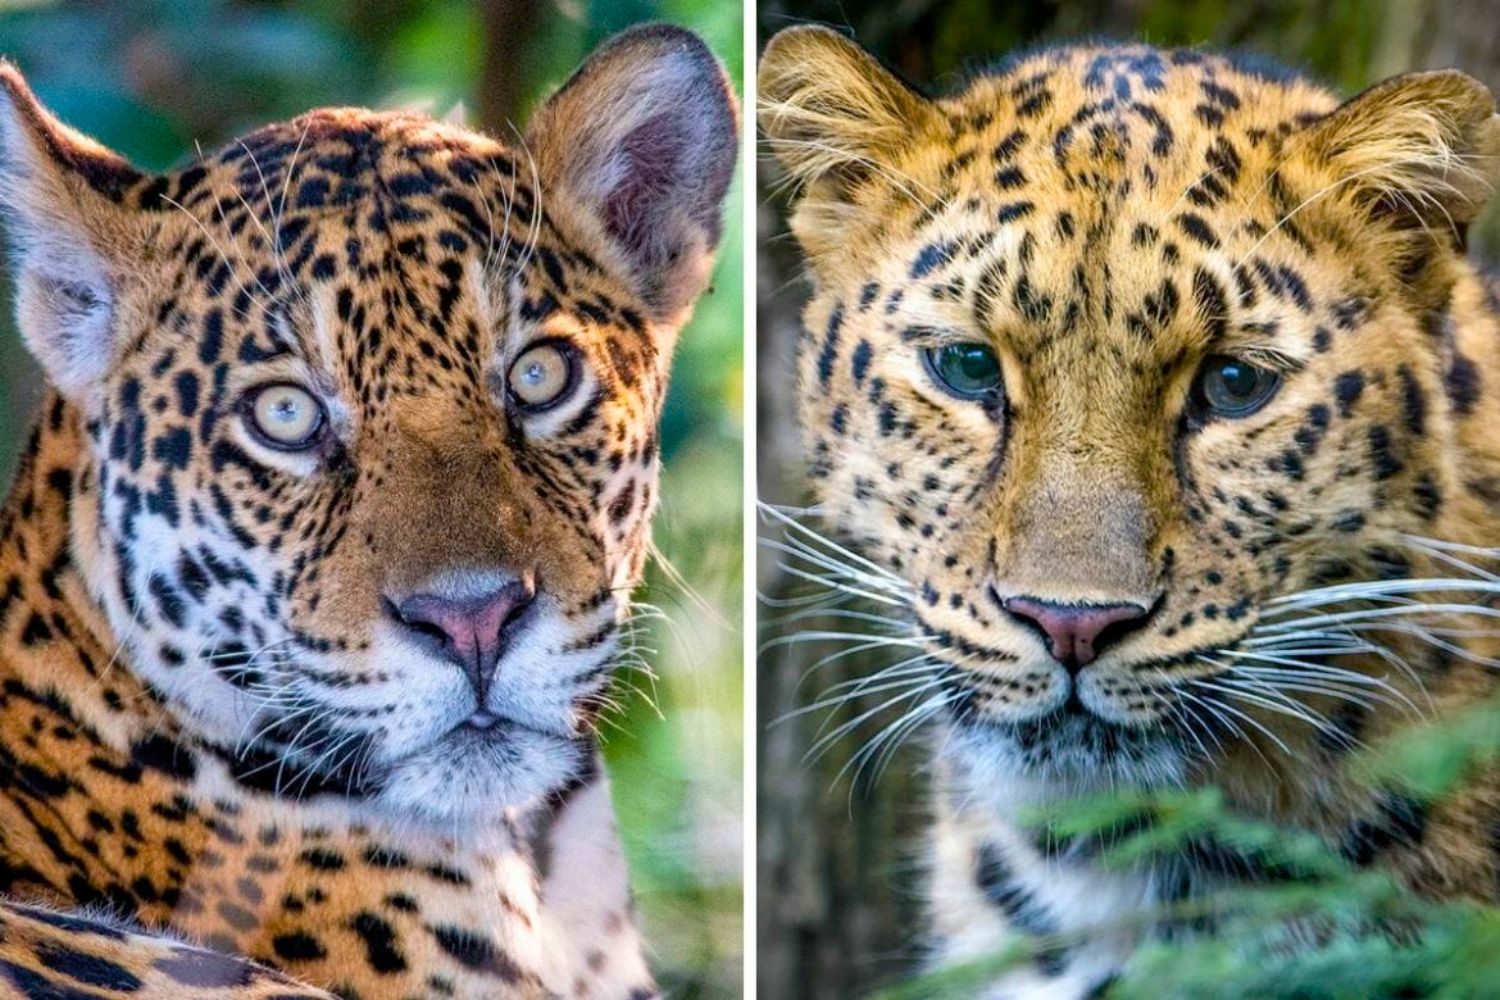 7. Differences between jaguar and leopard.